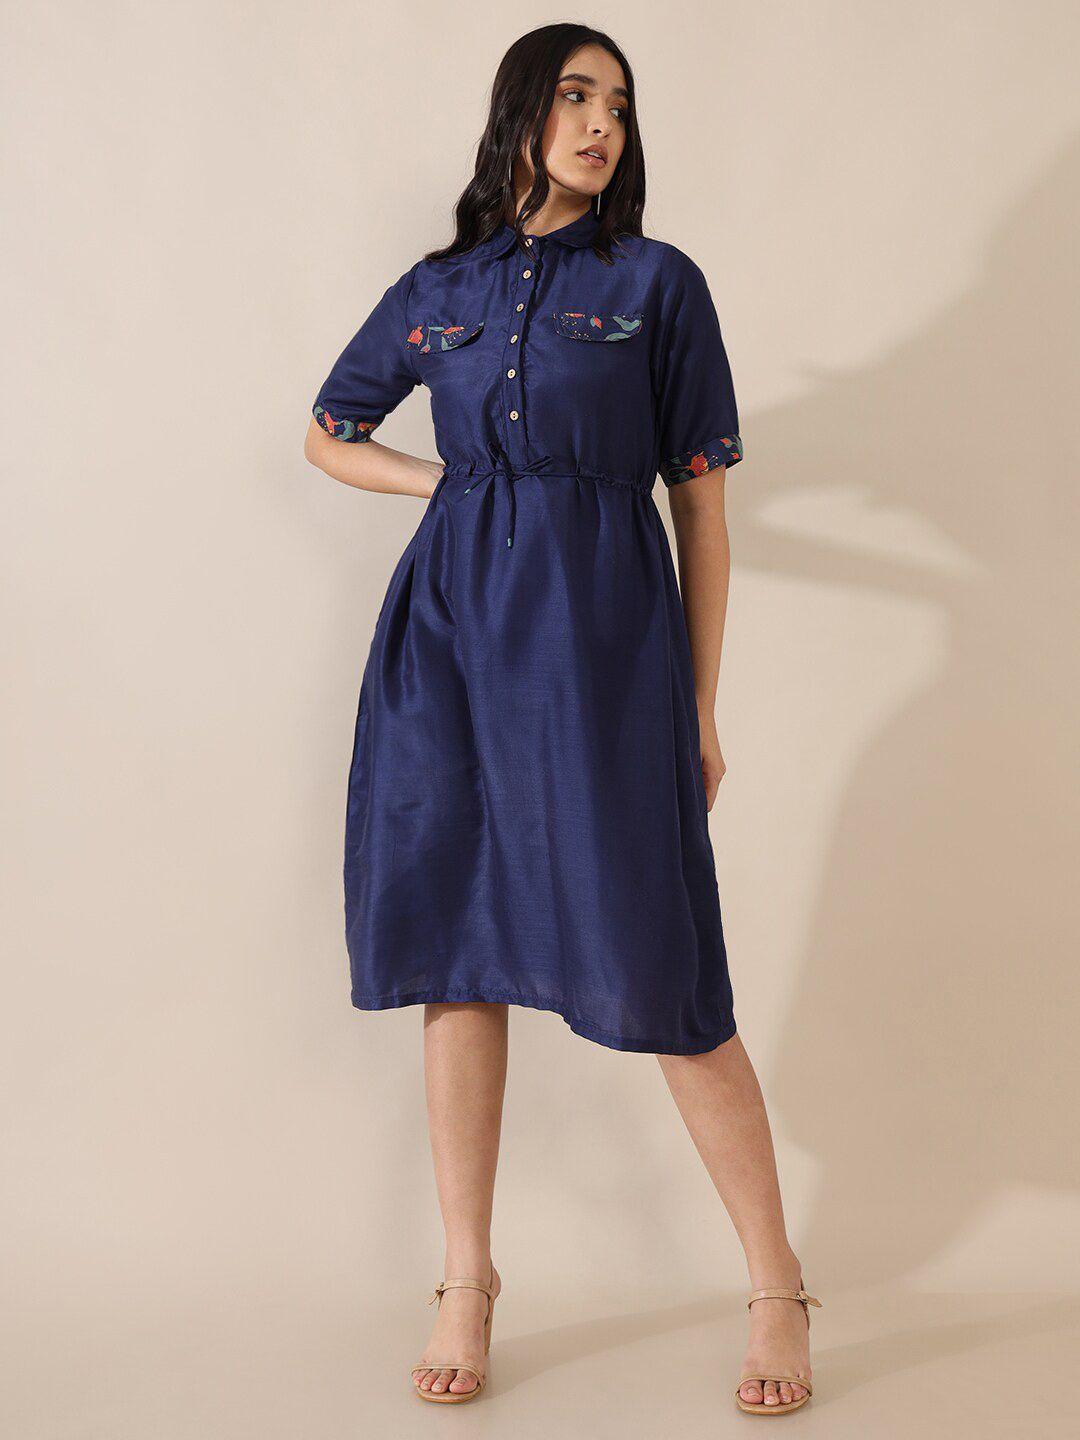 saaki short sleeves fit and flare shirt collar dress